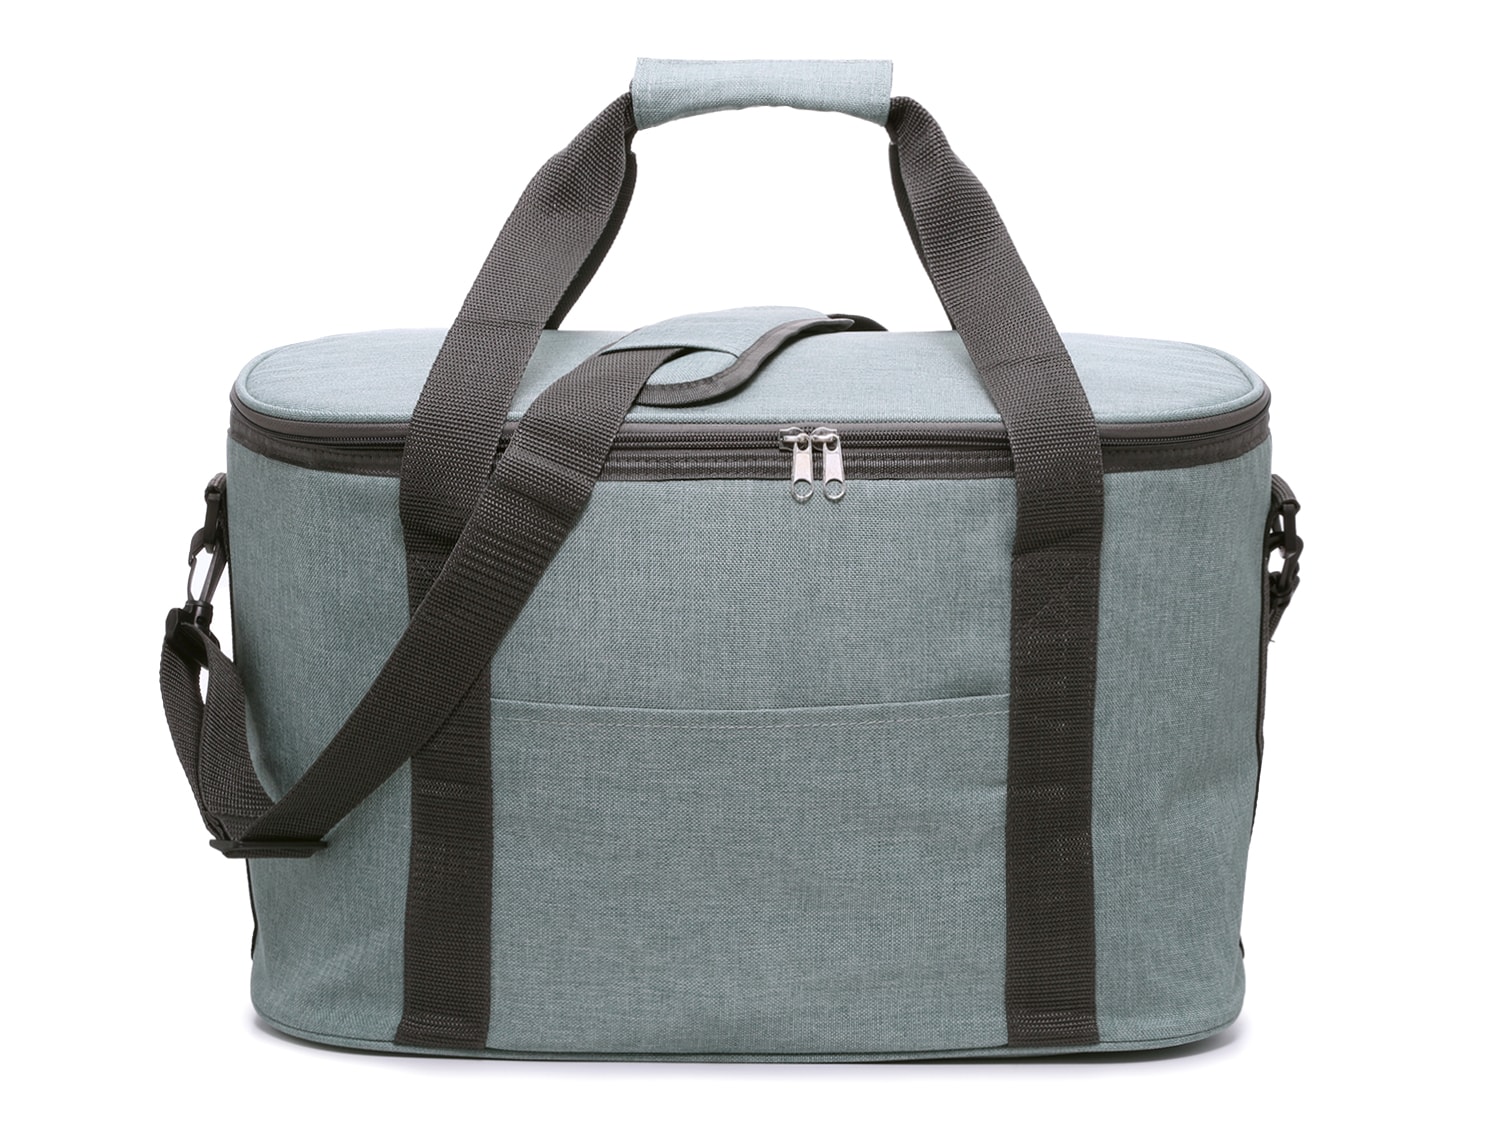 DSW Exclusive Free Cooler - Free Shipping | DSW